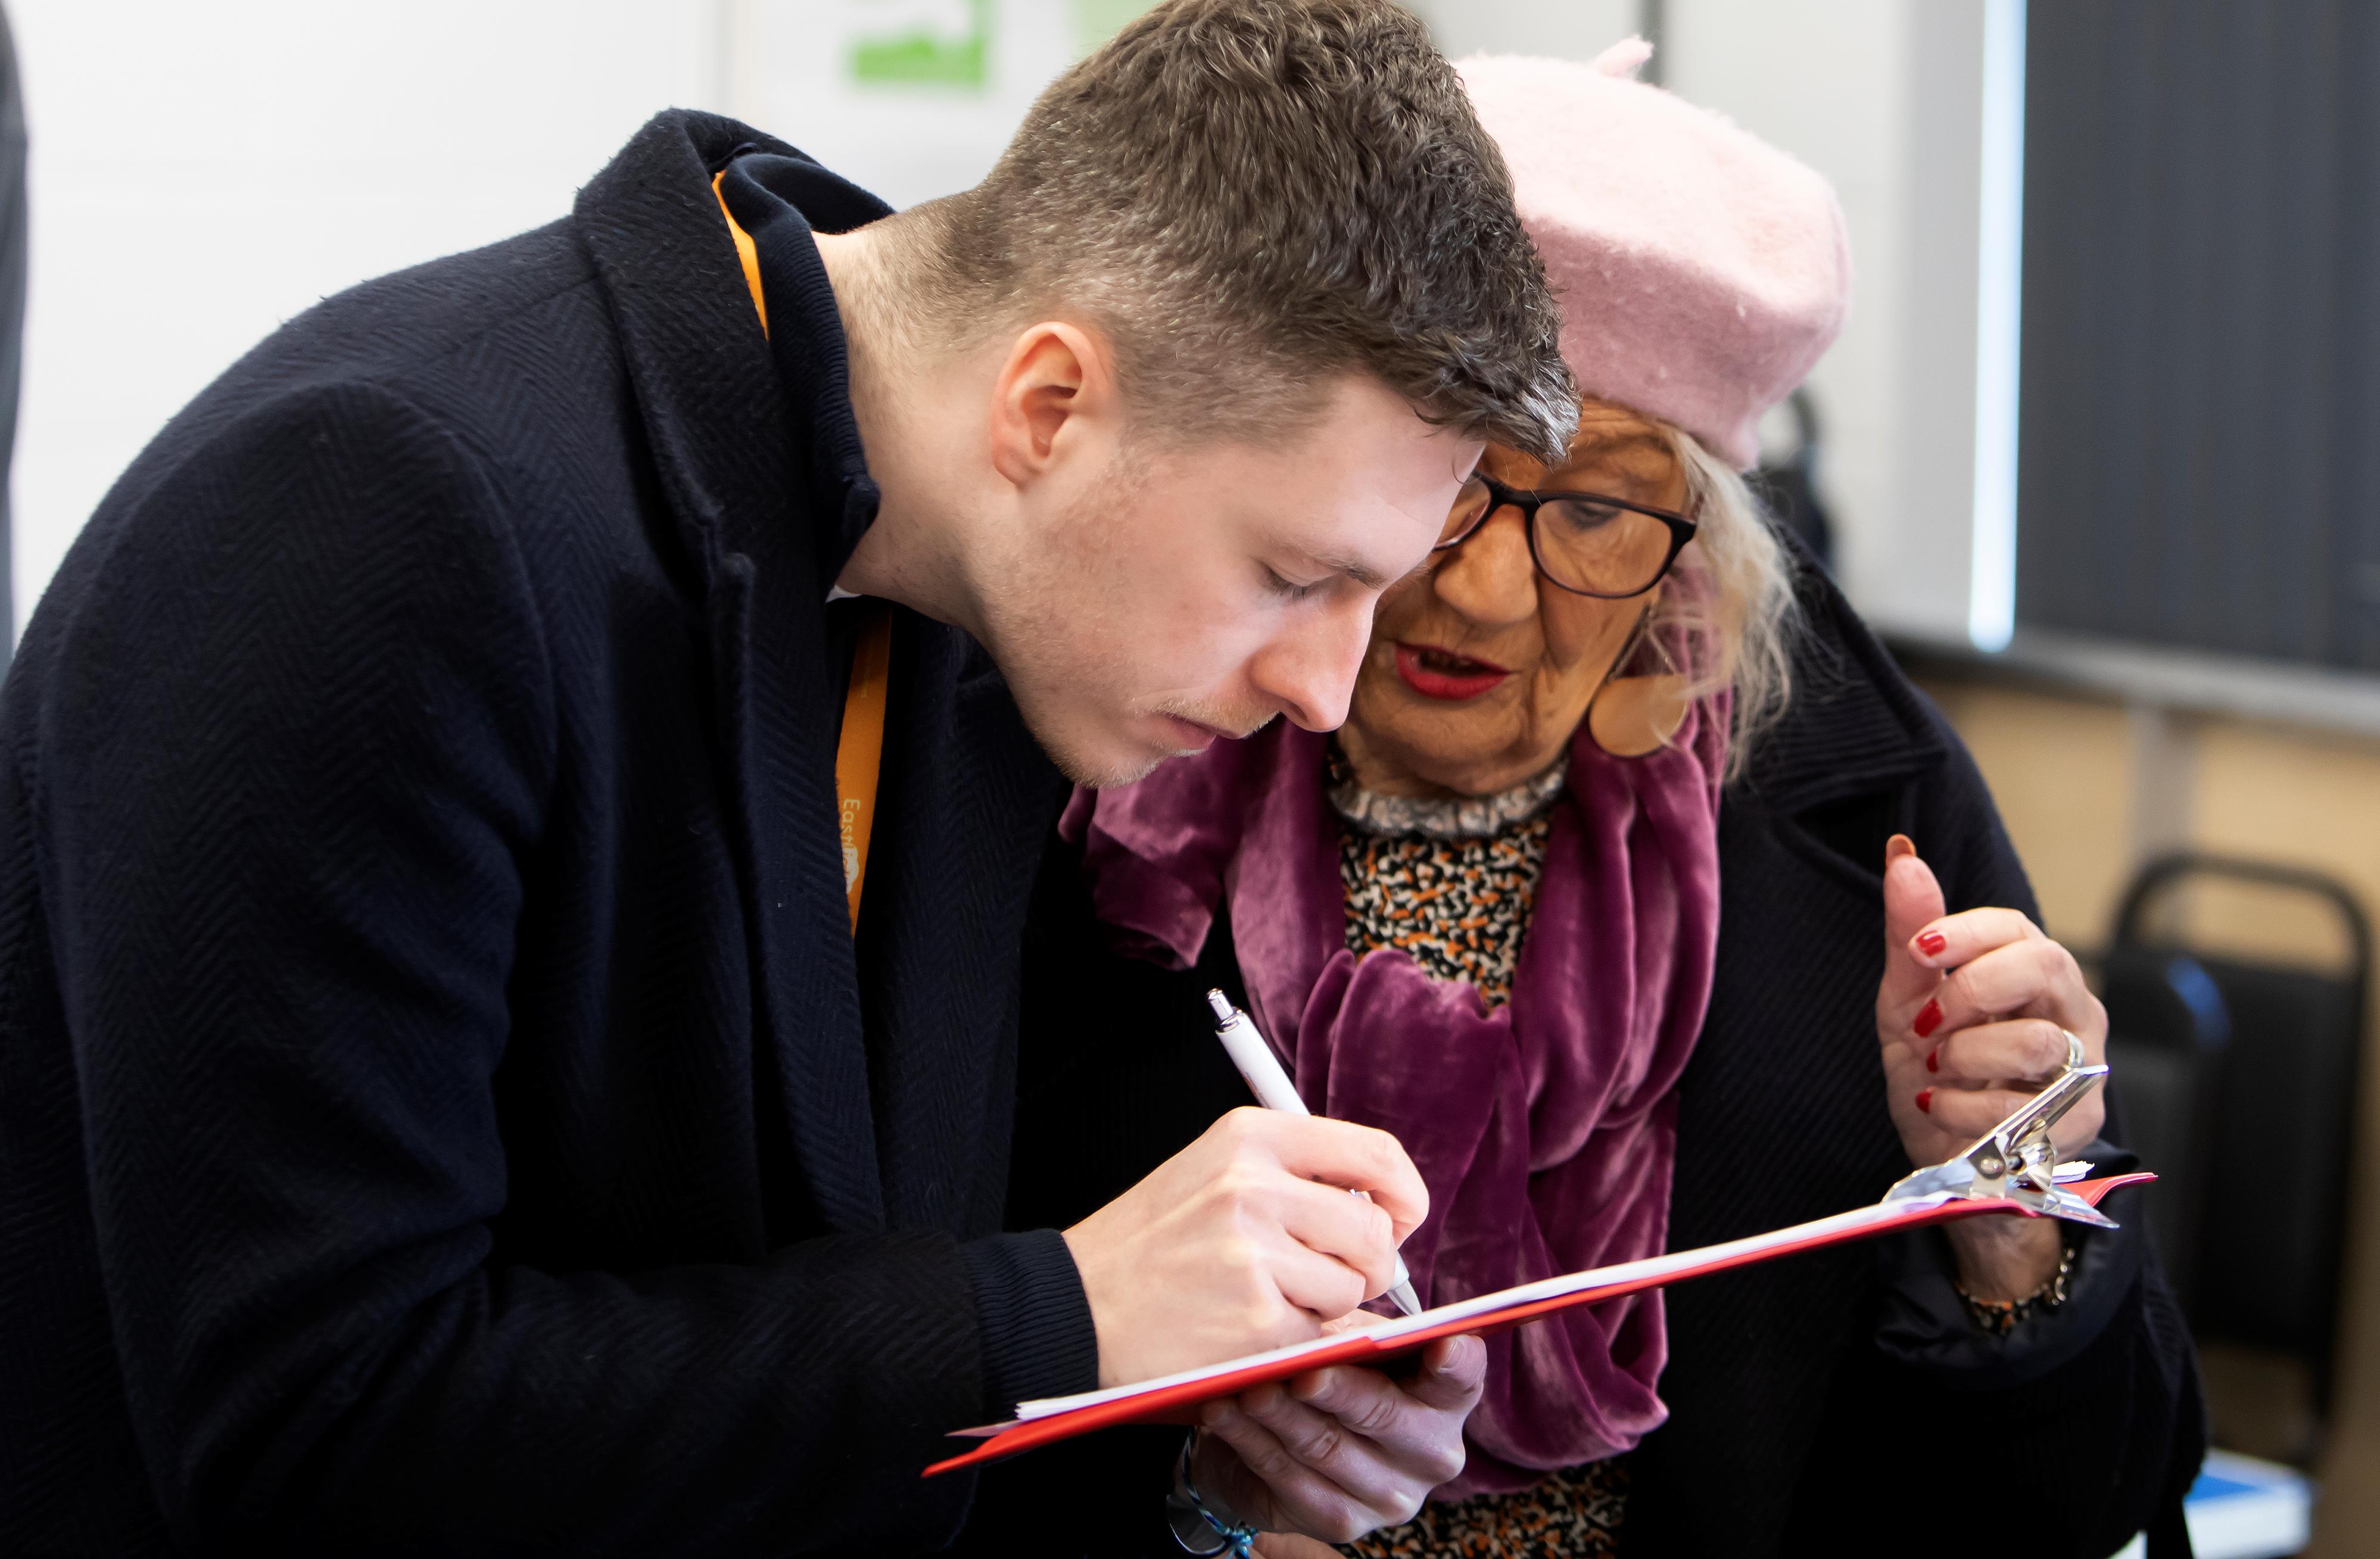 A man and a woman are stood together looking at a clipboard. The man is writing on the clipboard with a pen.